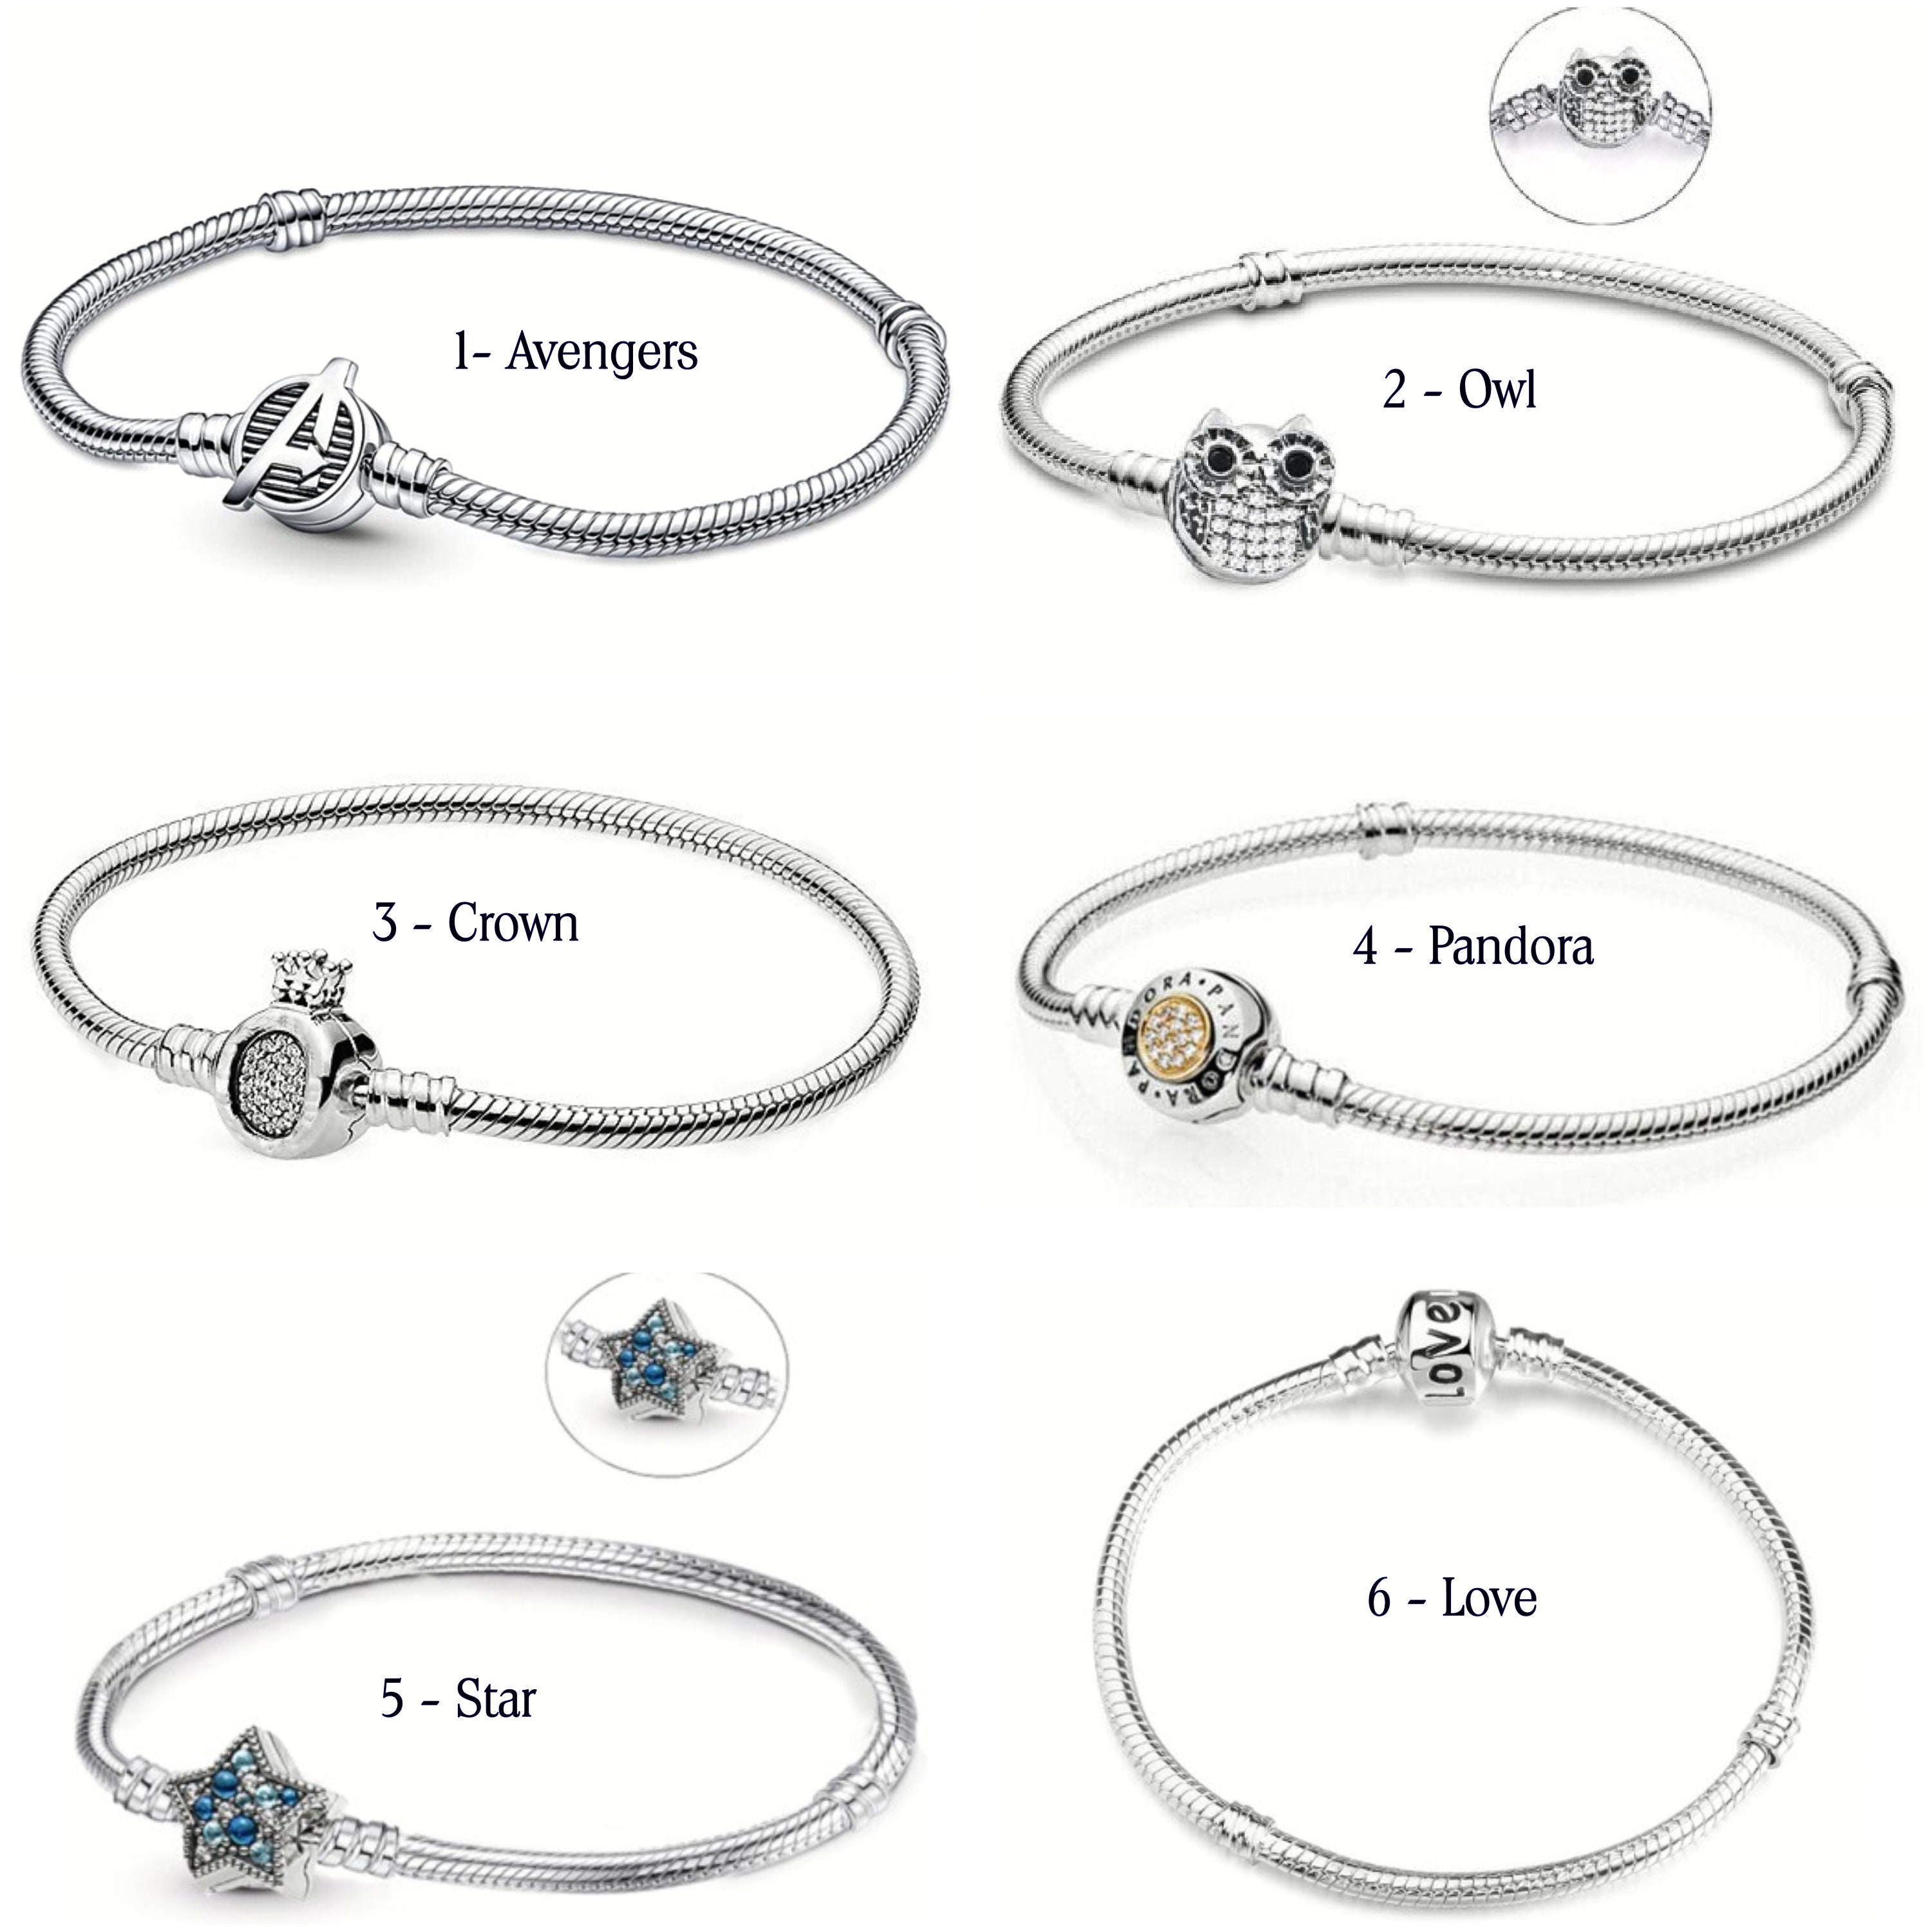 Beaded Pandora Style Bracelet with Engraveable Heart Charm various styles